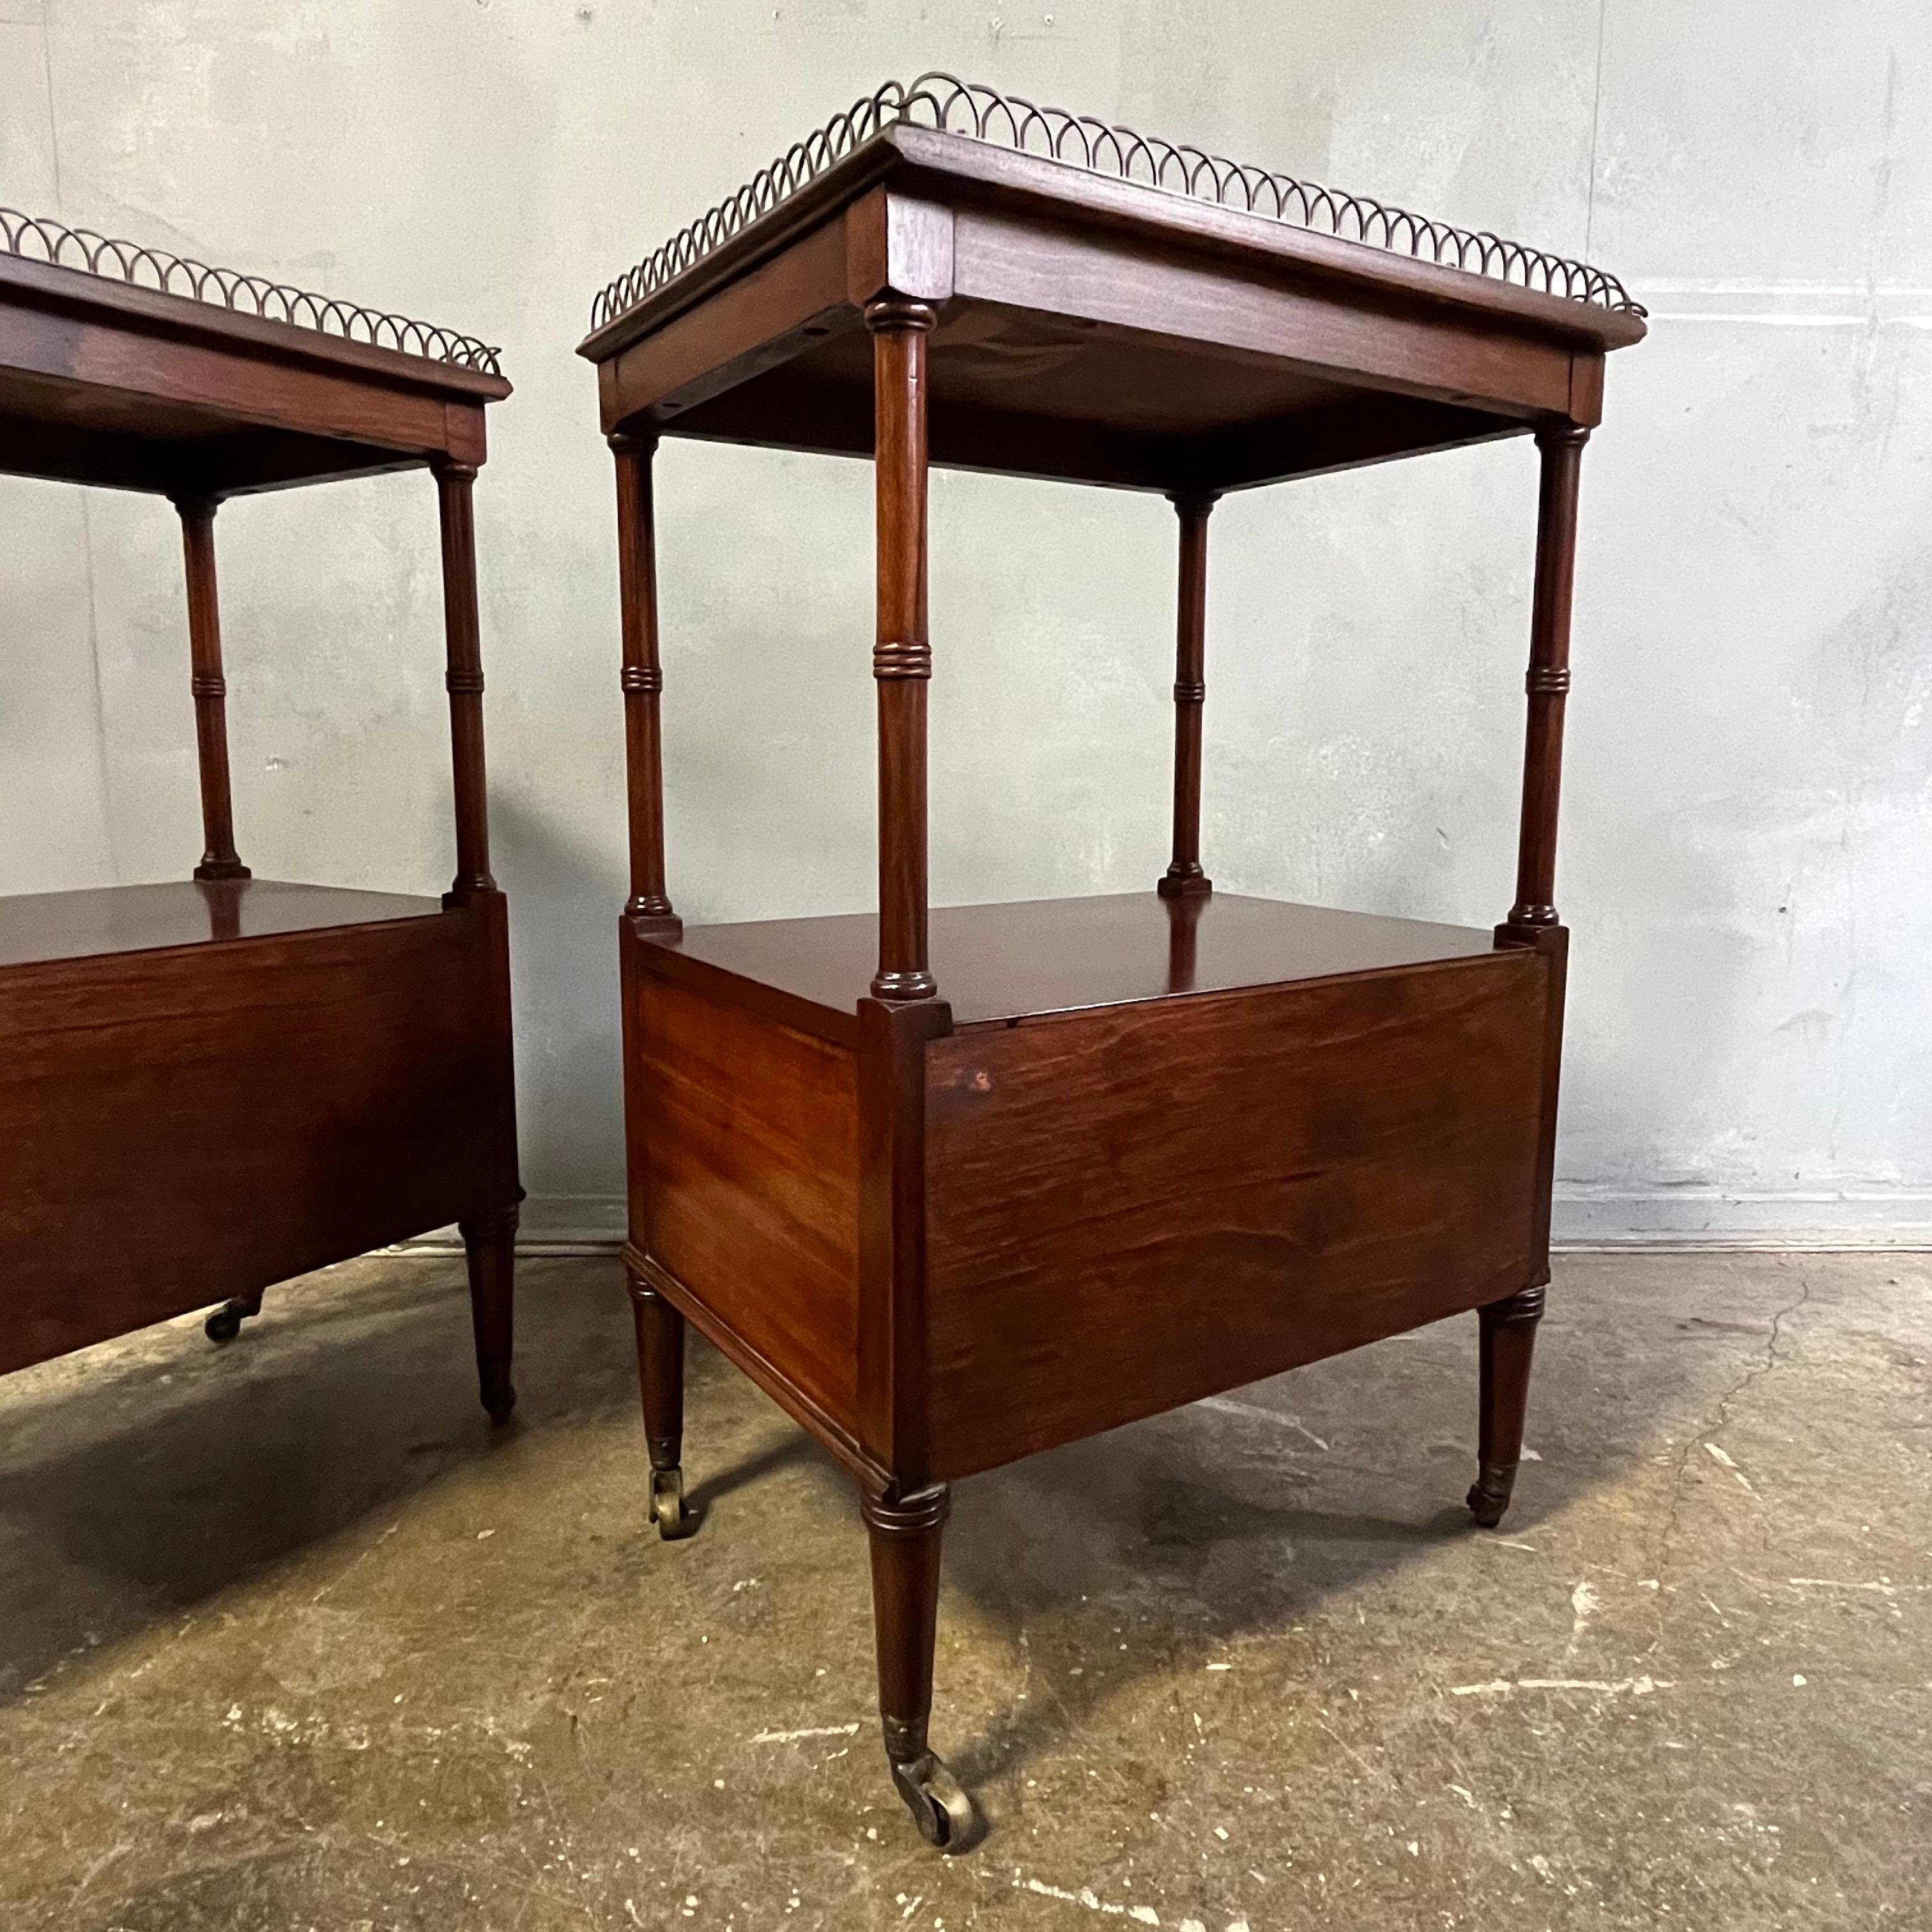 Vintage Petite Federal Style Mahogany Bedside Tables 1